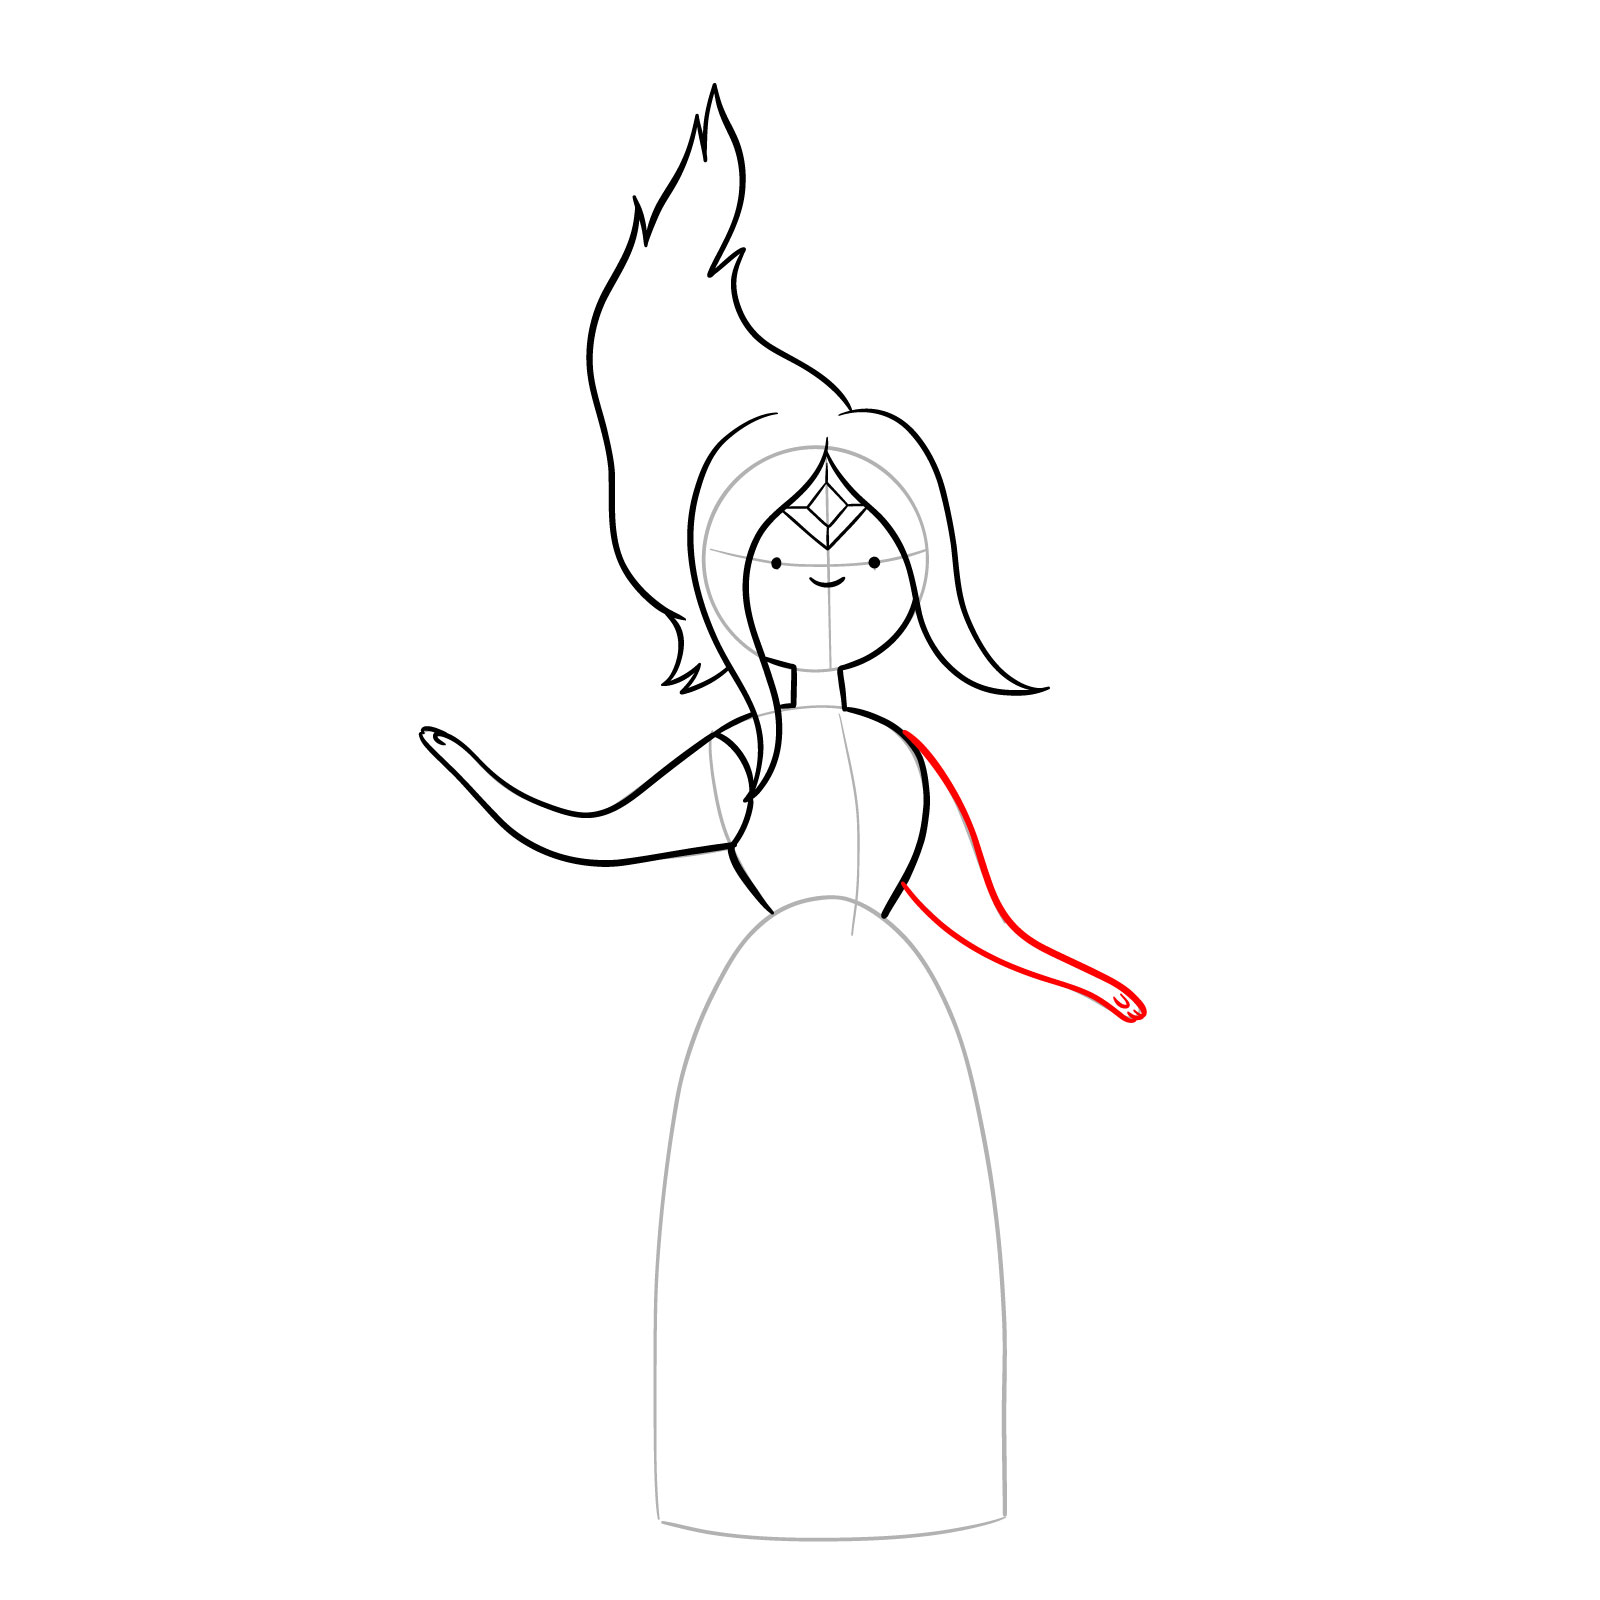 How to draw Flame Princess from Incendium Episode - step 12